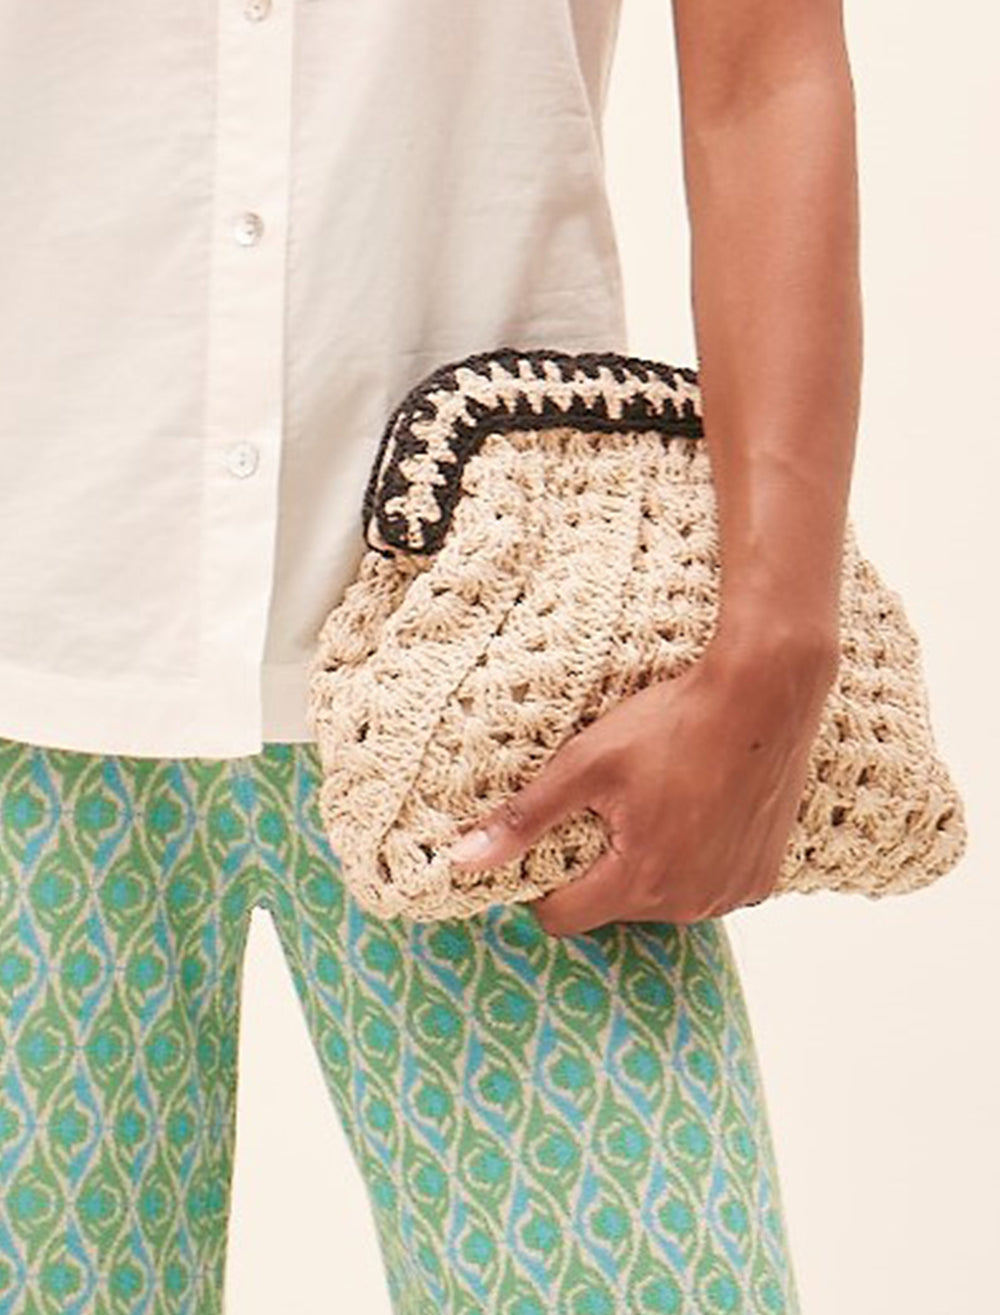 Model carrying Suncoo Paris' Arvel Clutch in Natural and Black Raffia.